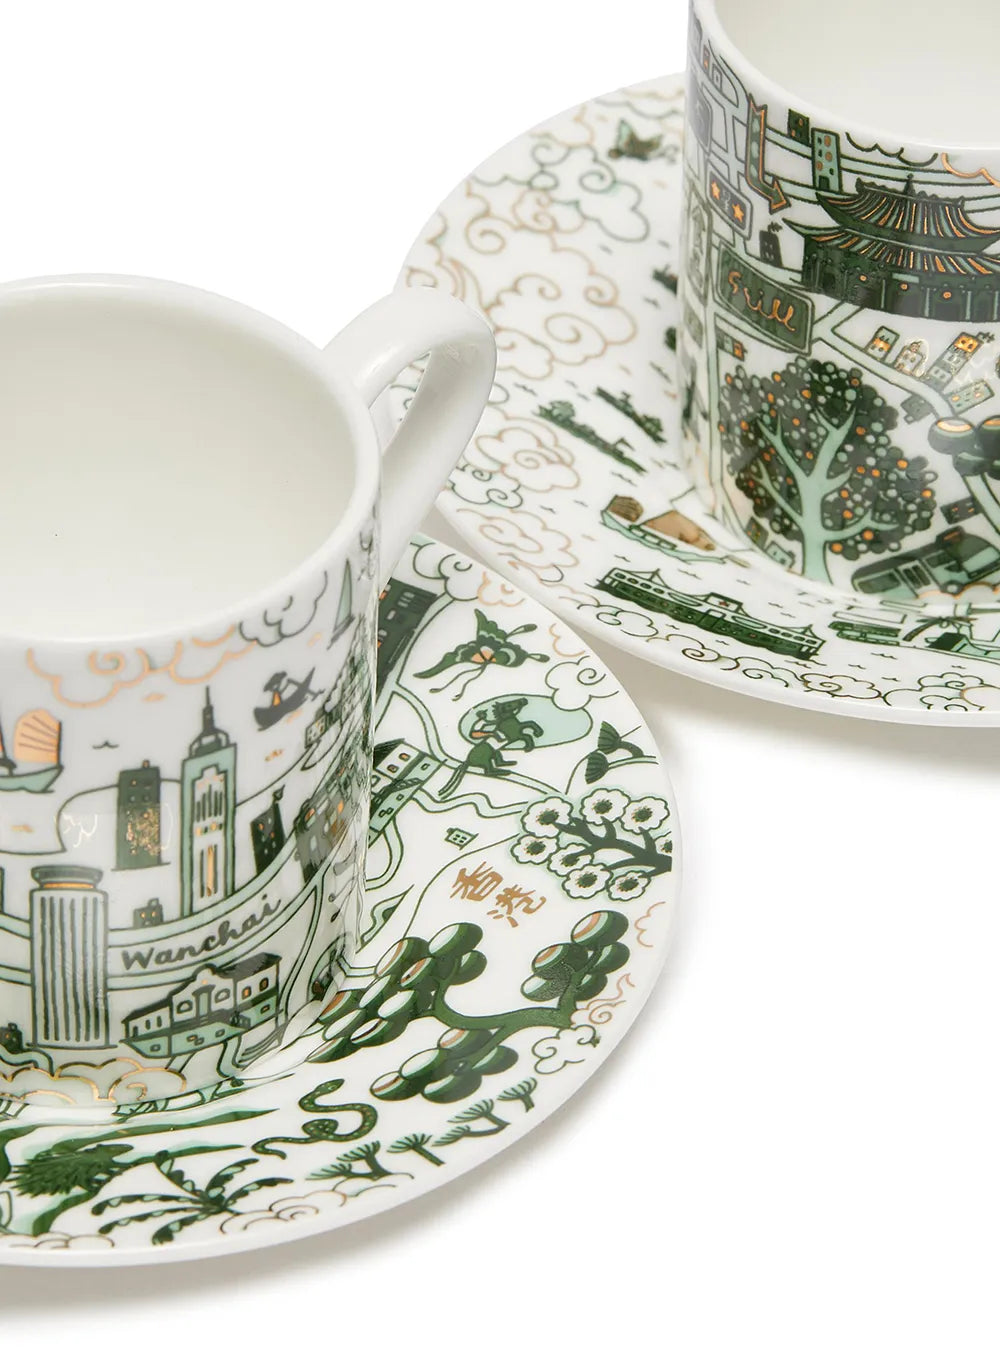 Hong Kong & Kowloon Willow Espresso Cups & Saucers - Set Of 2, Green and Gold by Faux | Young Soy - Wake Concept Store  